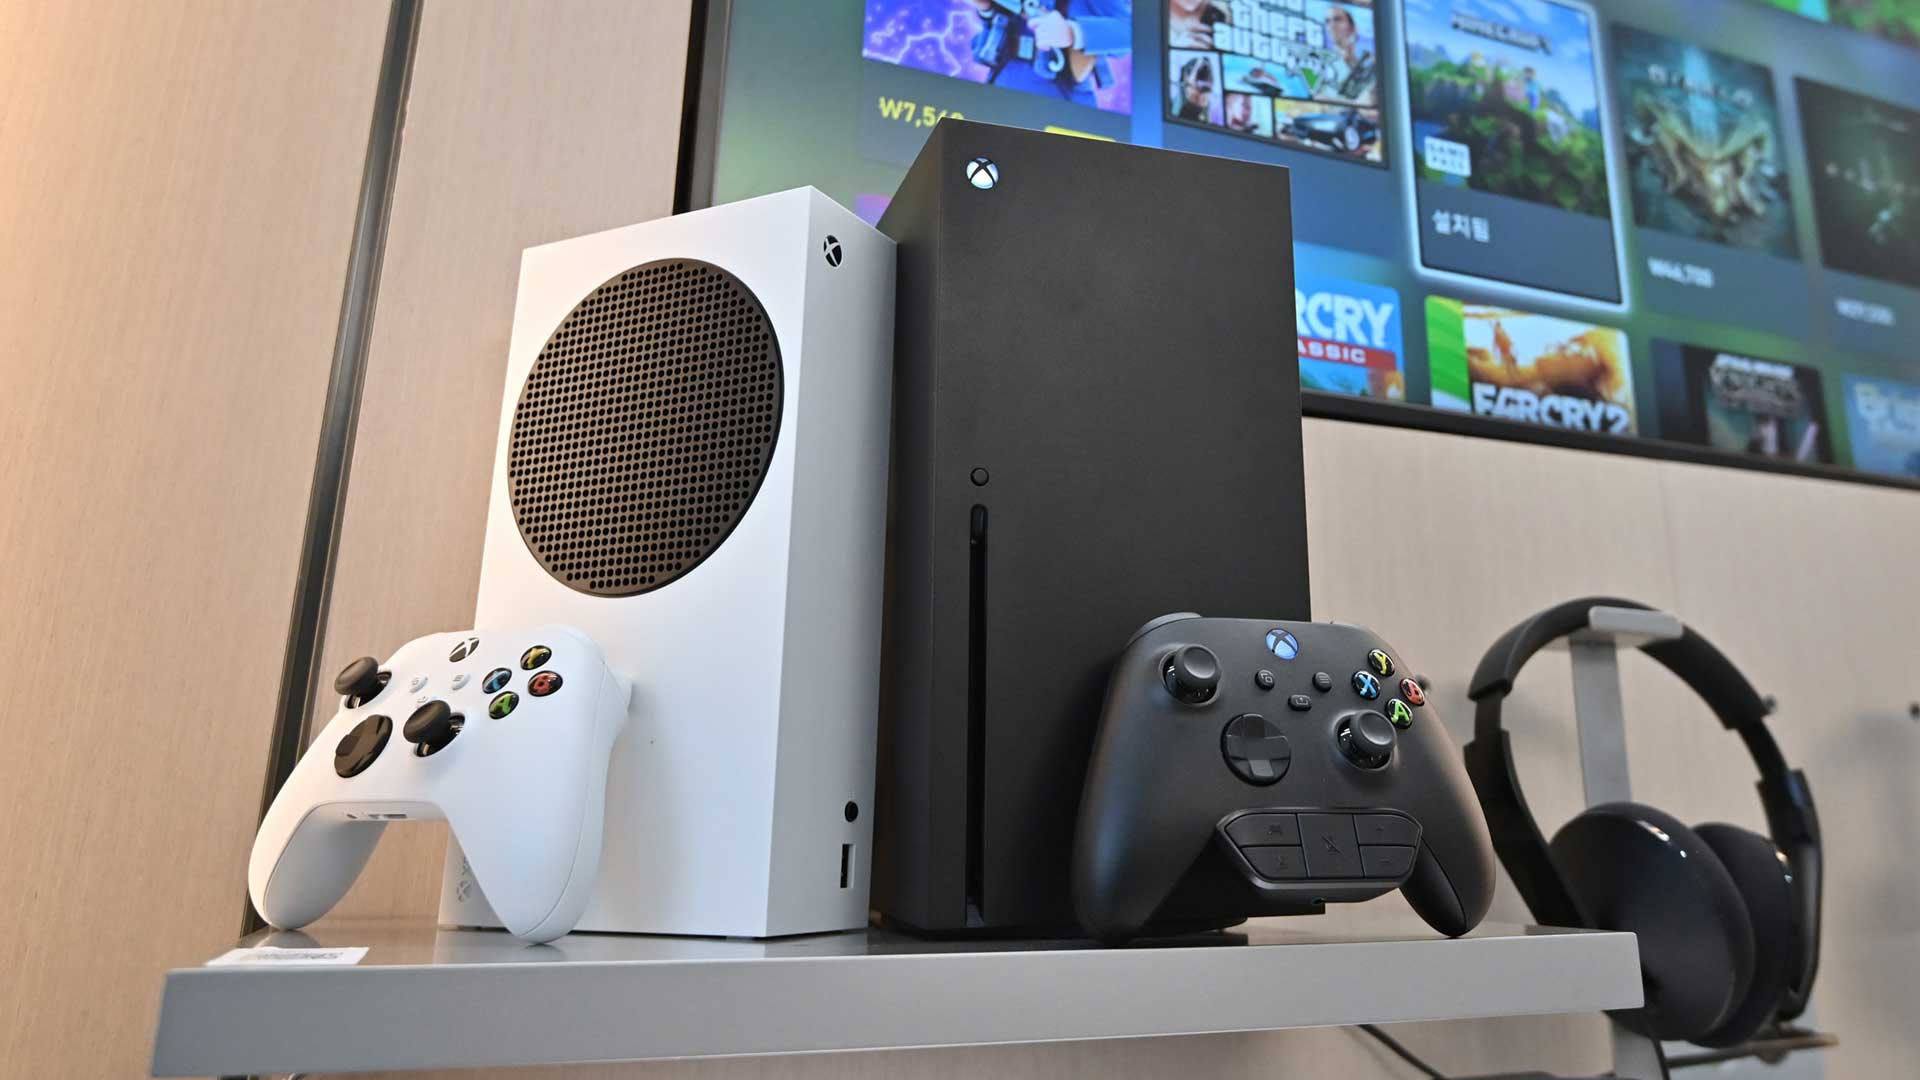 Leaked Images of a White and Apparently Digital Only Xbox Series